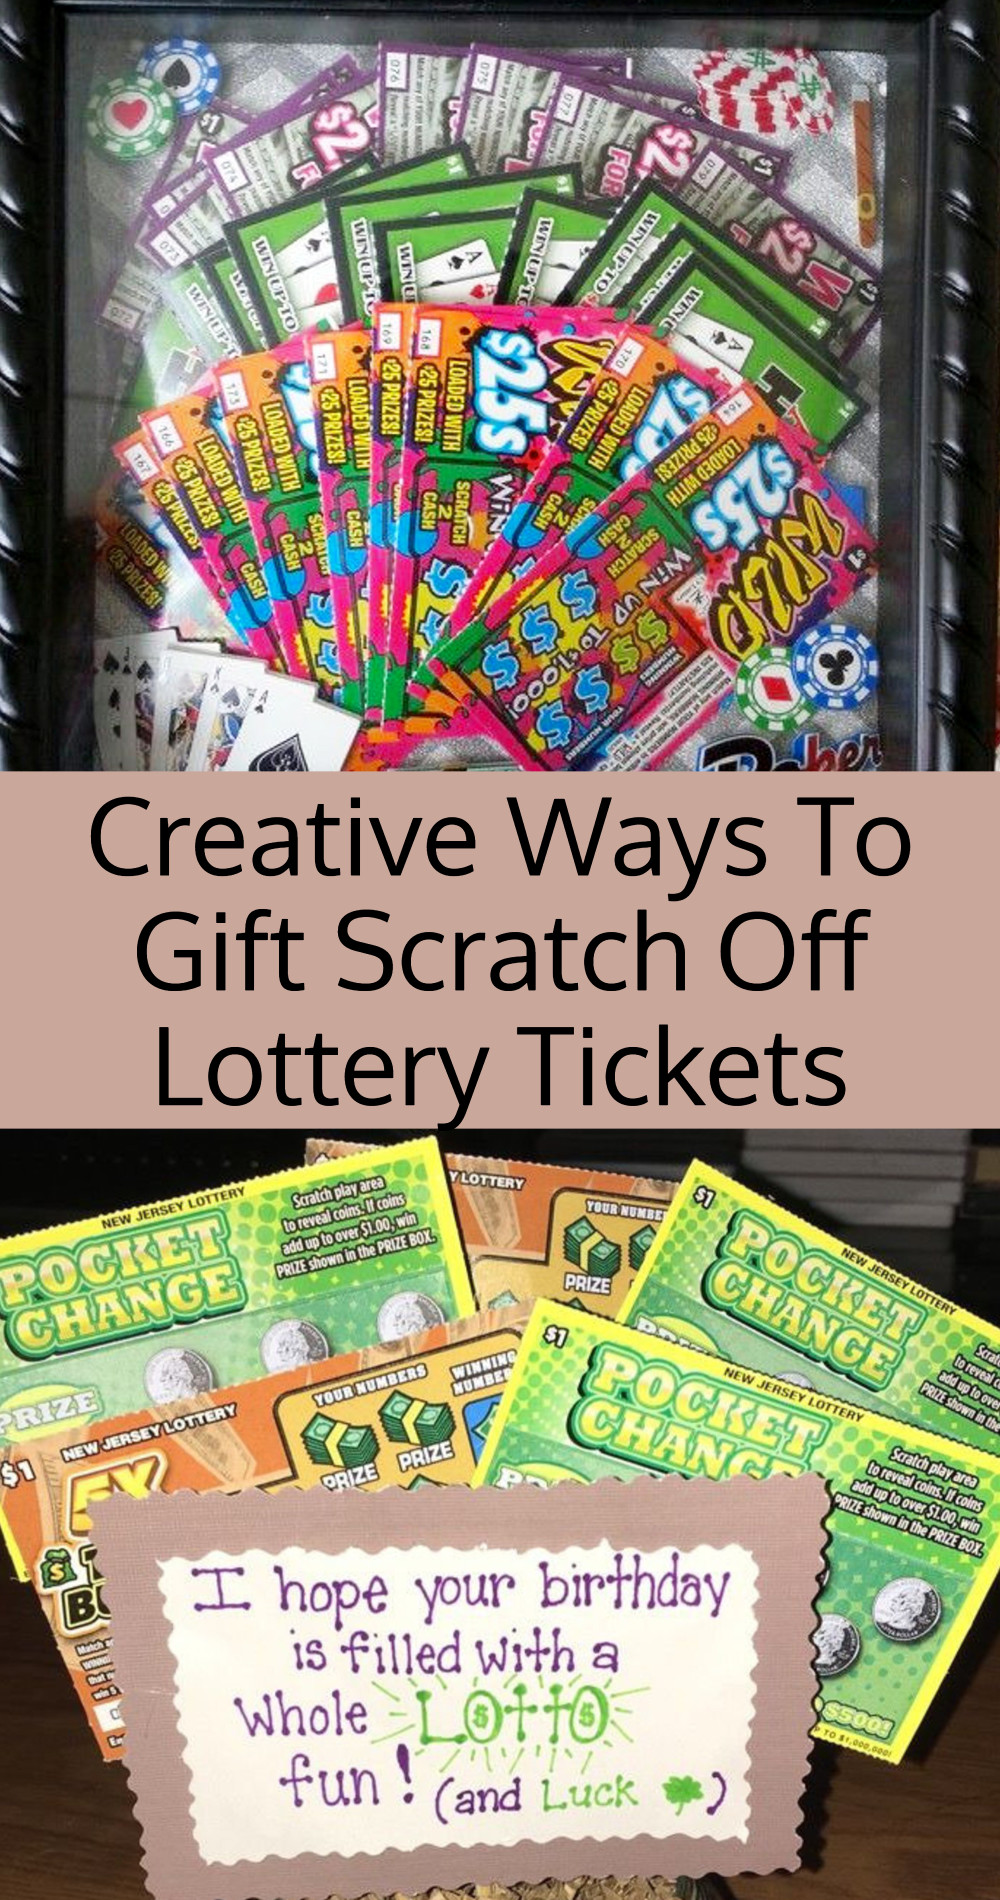 Creative ways to gift scratch off lottery tickets